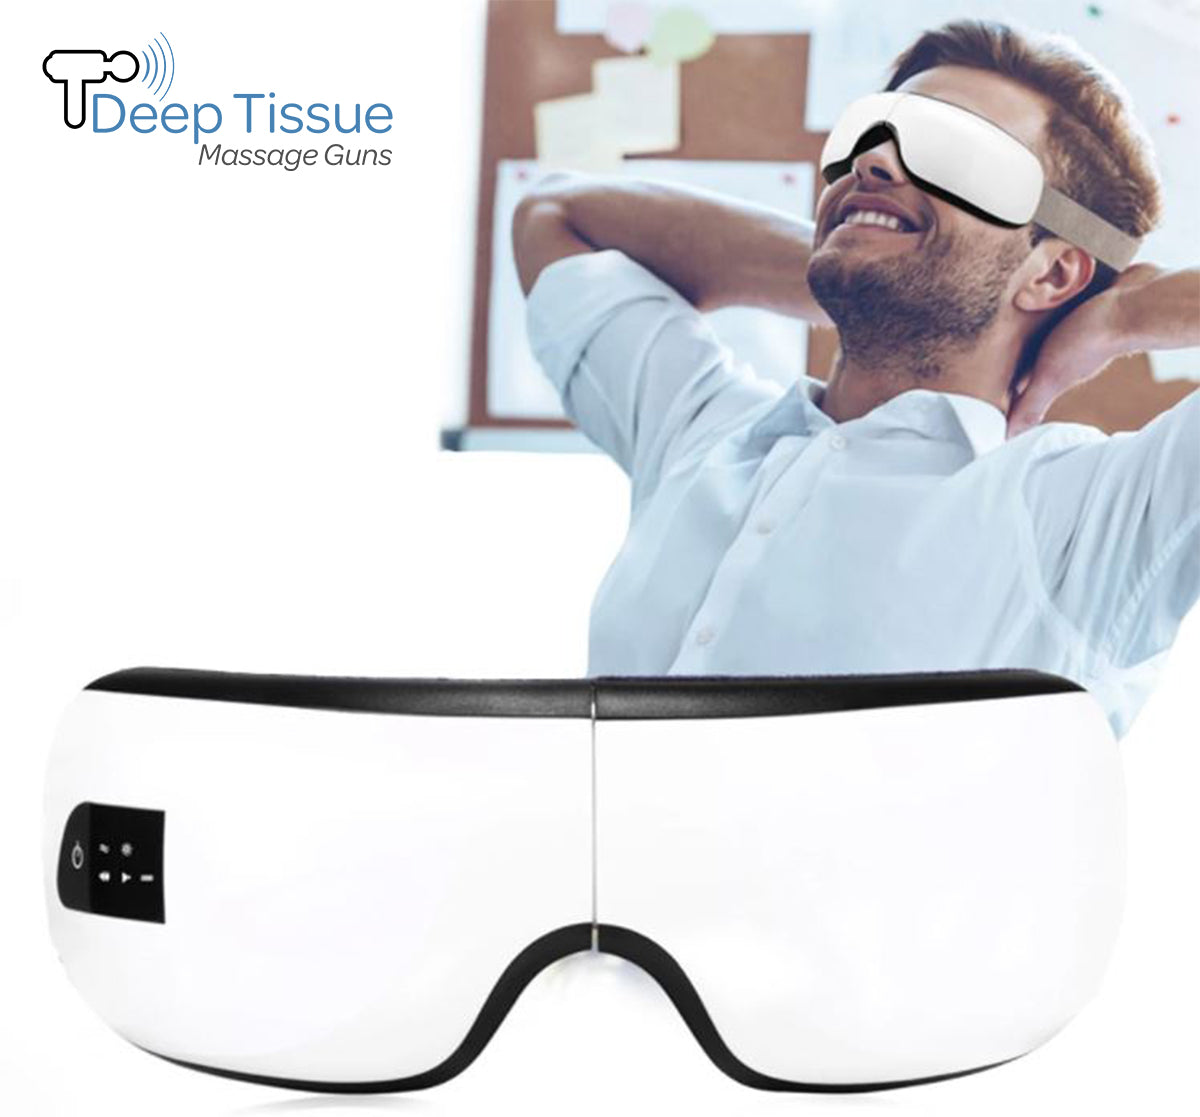 The smart eye massager is a great tool to relieve eye strain and soreness and can even help reduce migraine headaches